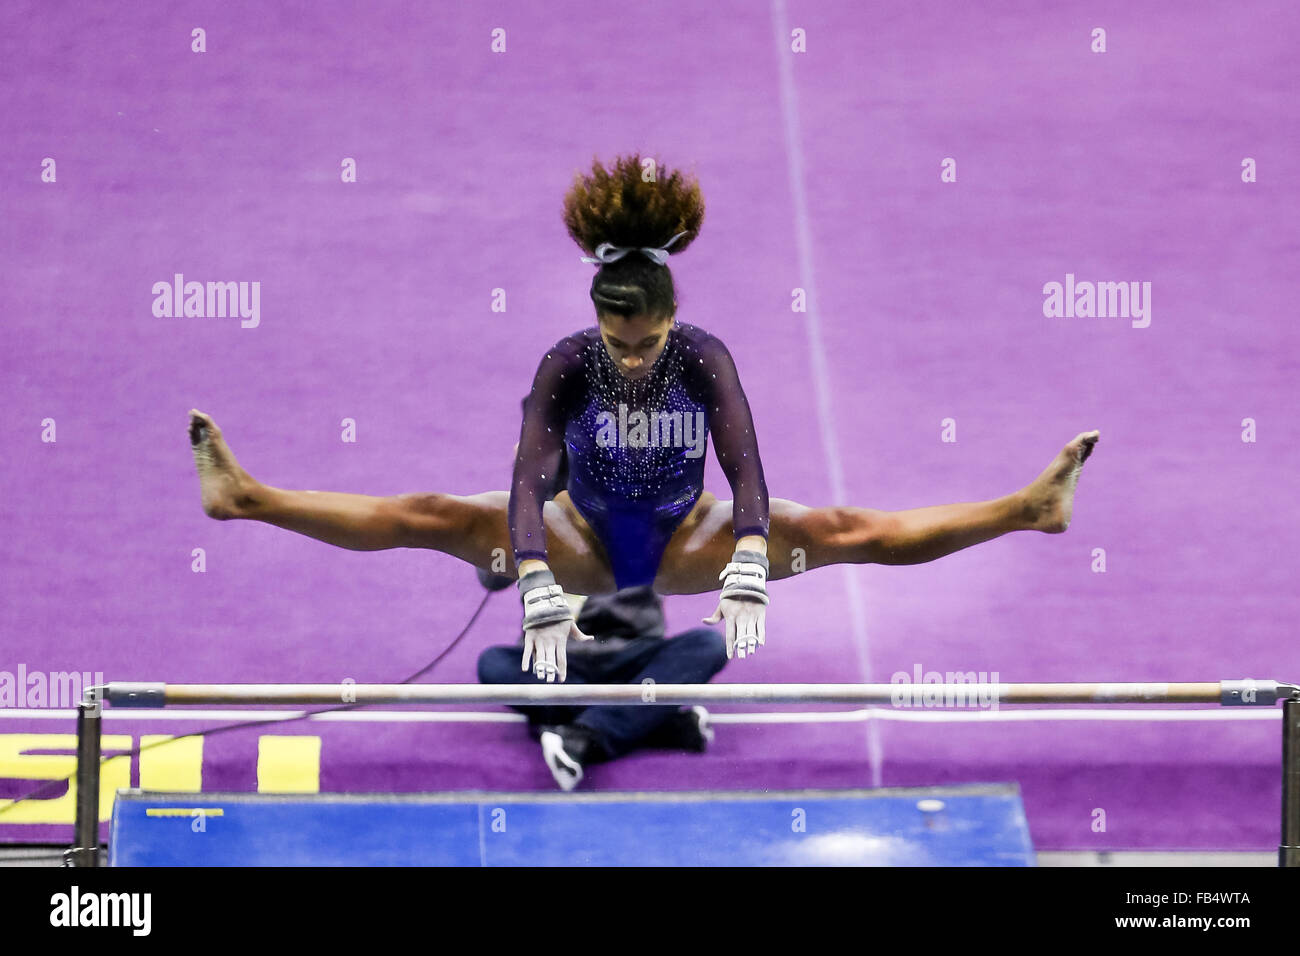 Baton Rouge, LA, USA. 09th Jan, 2016. LSU Tigers Randii Wyrick receives a 9.725 on the bars during a NCAA gymnastics meet between the Oklahoma Sooners at LSU Tigers at the Pete Maravich Assembly Center in Baton Rouge, LA. LSU defeated Oklahoma 196.950 - 196.725 Stephen Lew/CSM/Alamy Live News Stock Photo